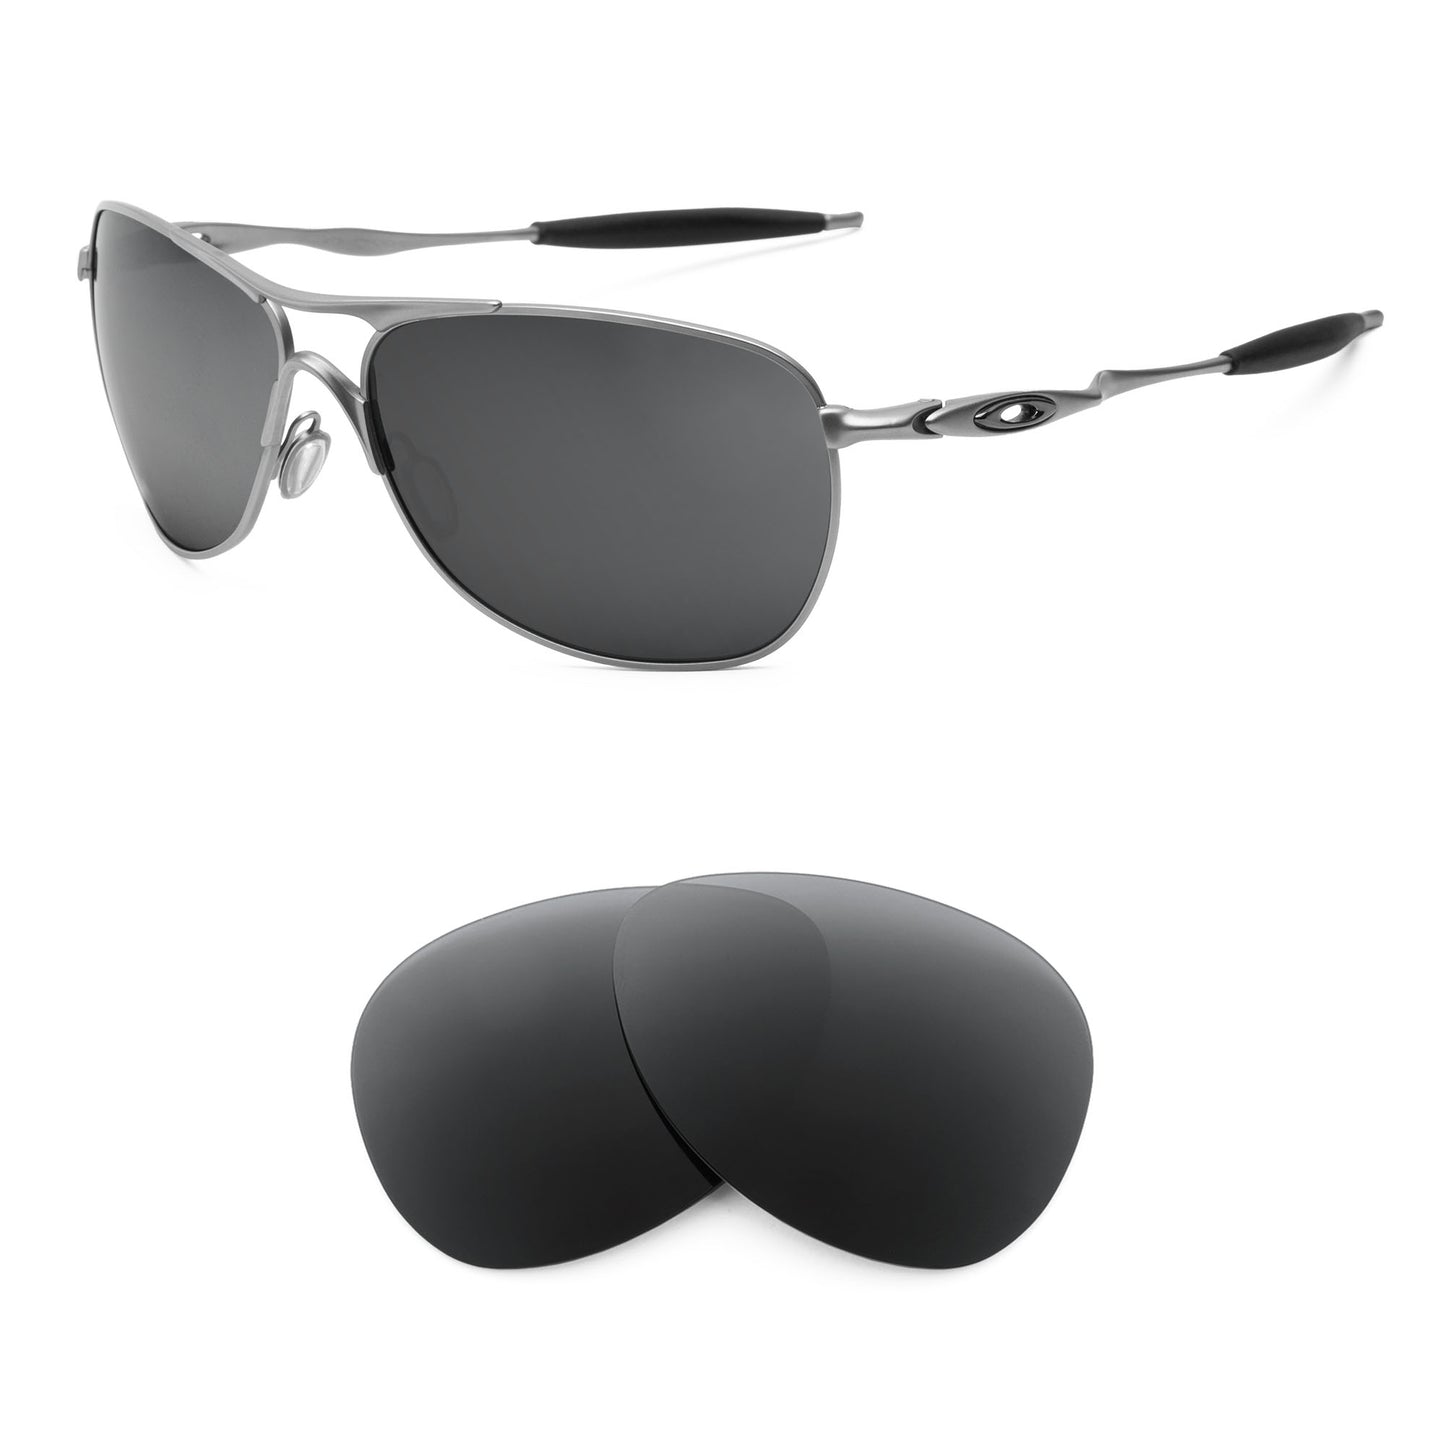 Oakley Crosshair Ti (61mm) sunglasses with replacement lenses